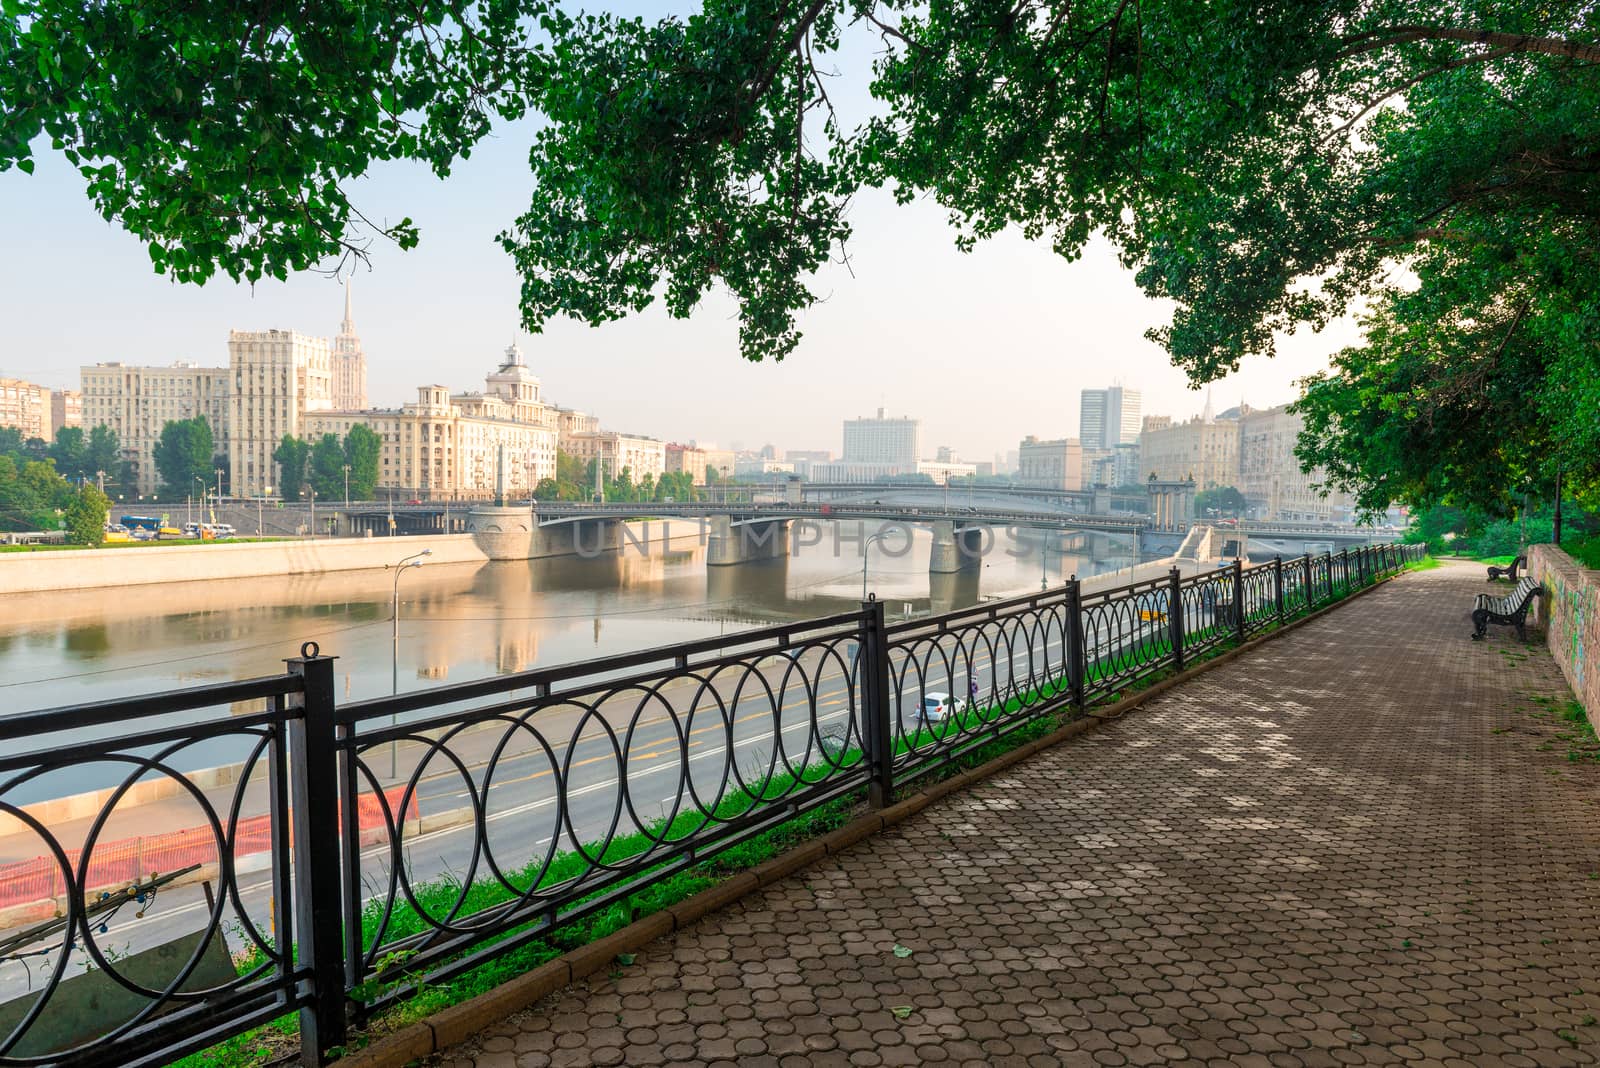 Moscow landscape at dawn, walk along the embankment of the river